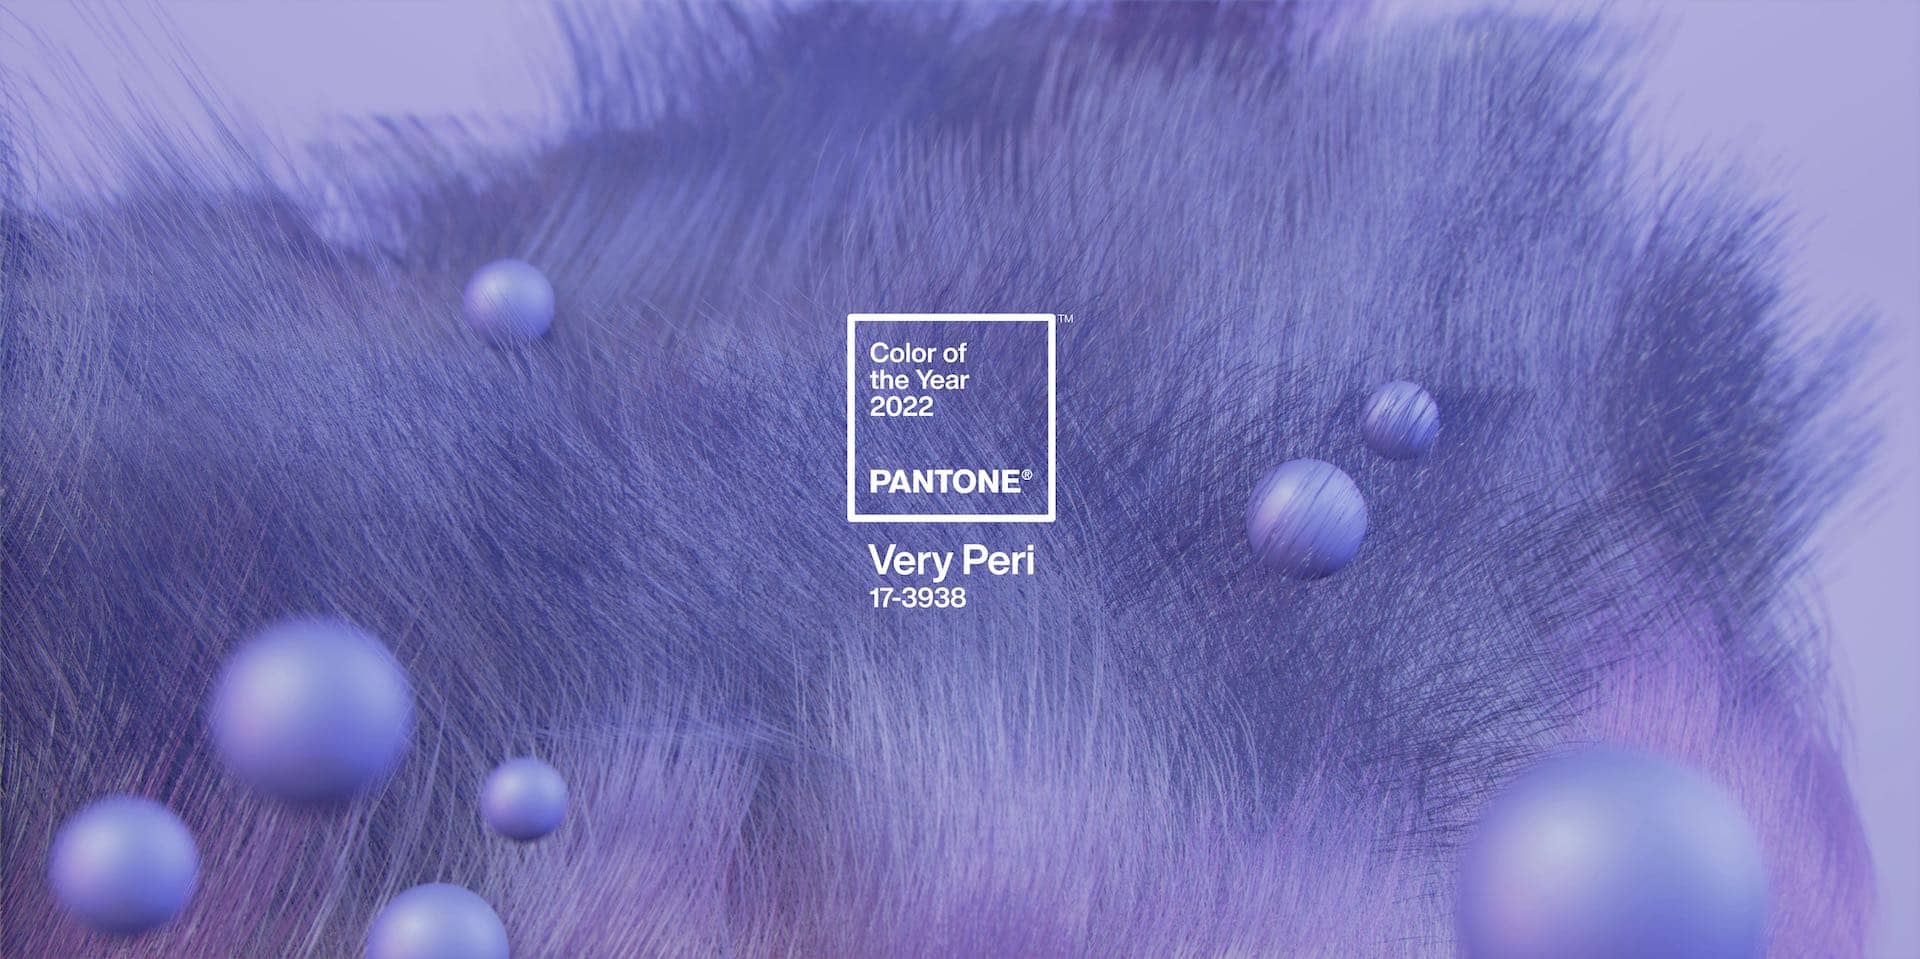 Final hero image, showing the Pantone Color of the Year lockup overlaid on the 3D render of a periwinkle hair simulation and floating spheres